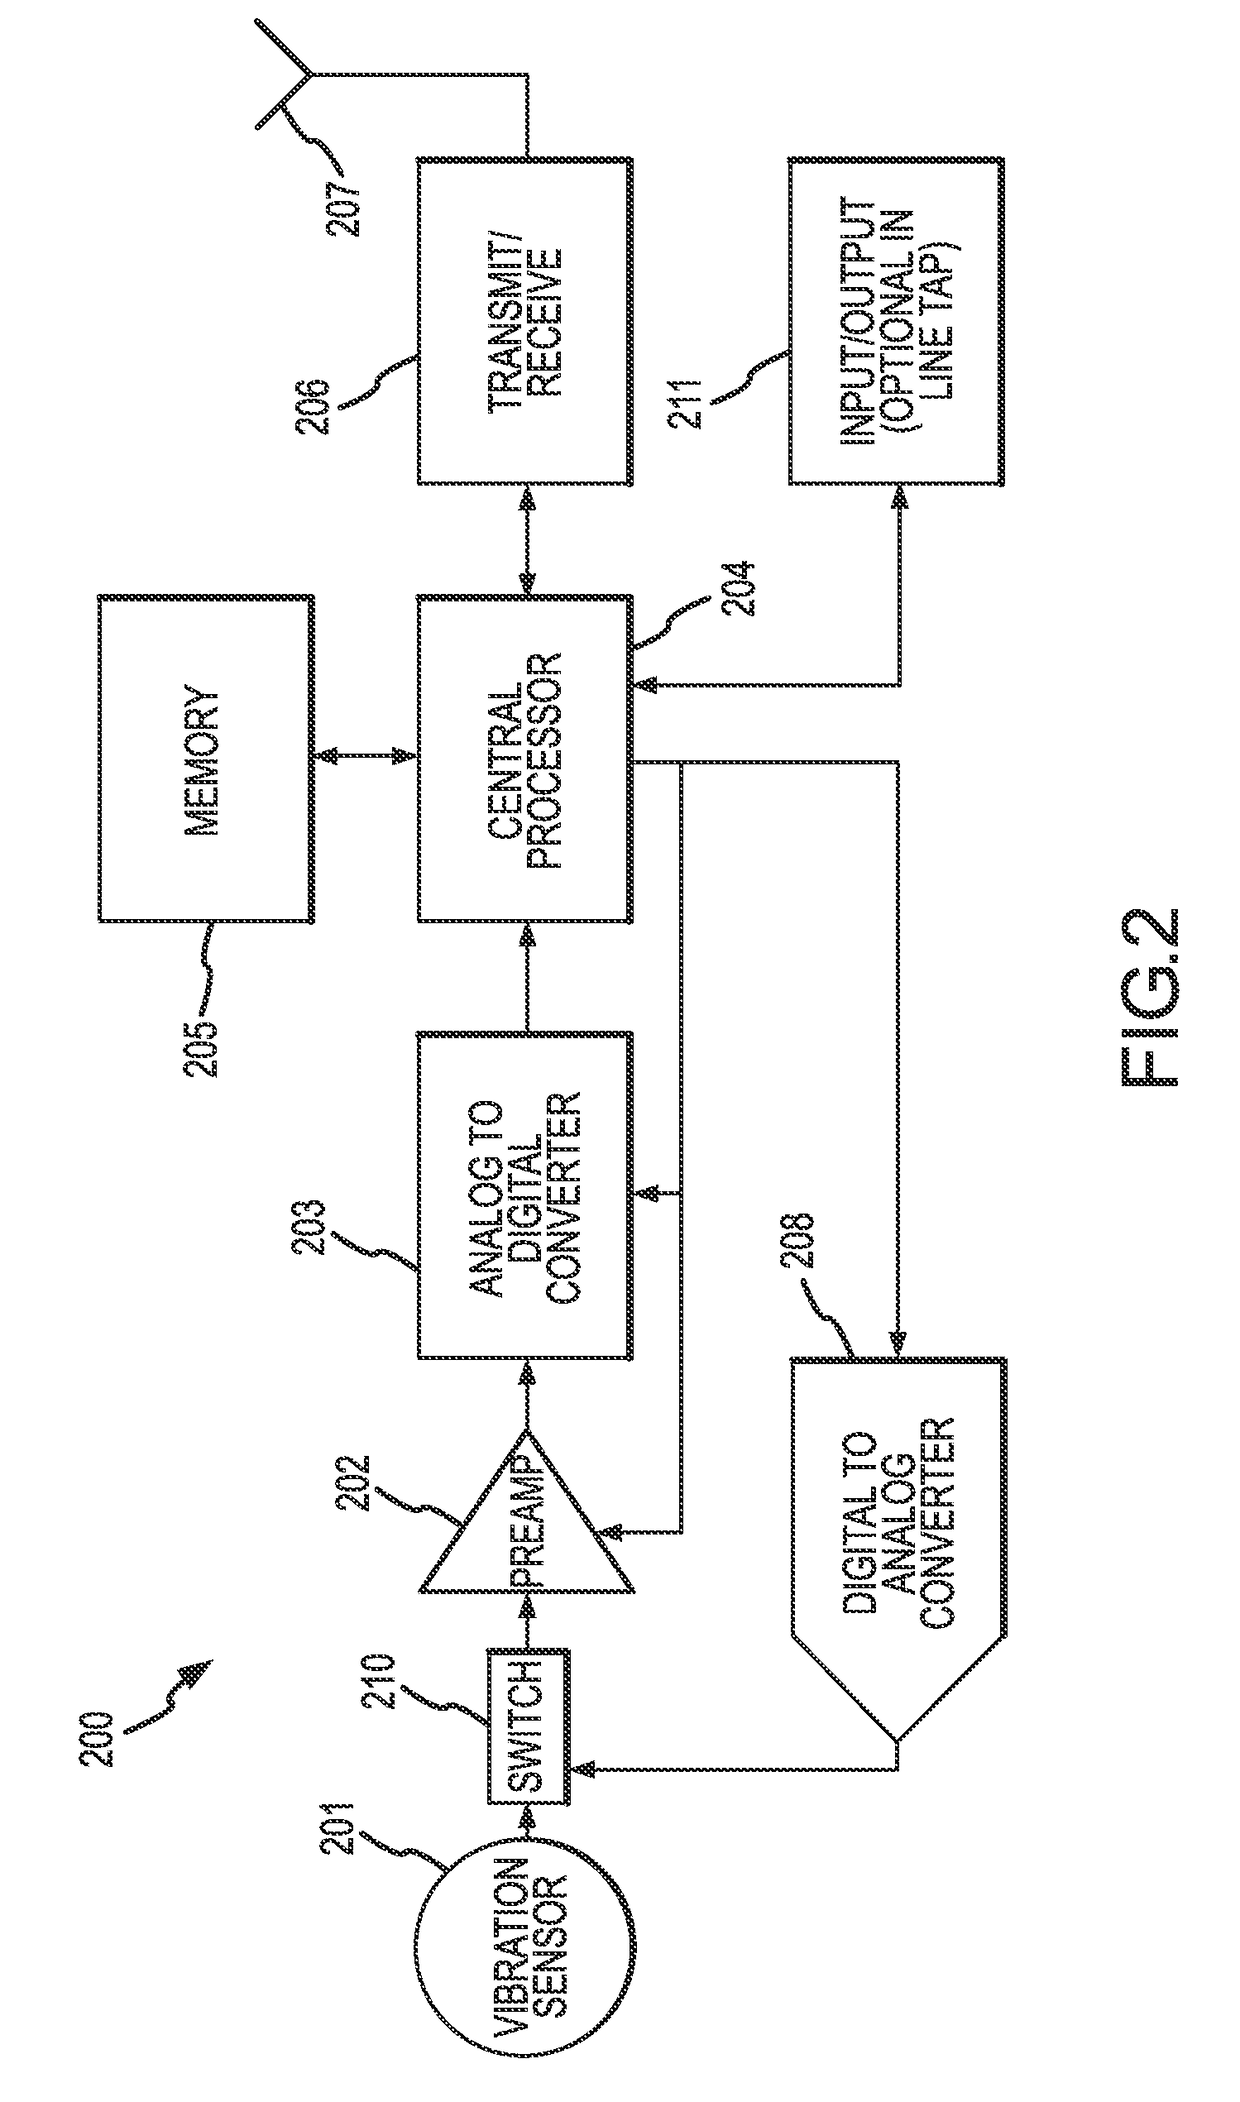 Multiplexing signature allocation for wireless exploration system